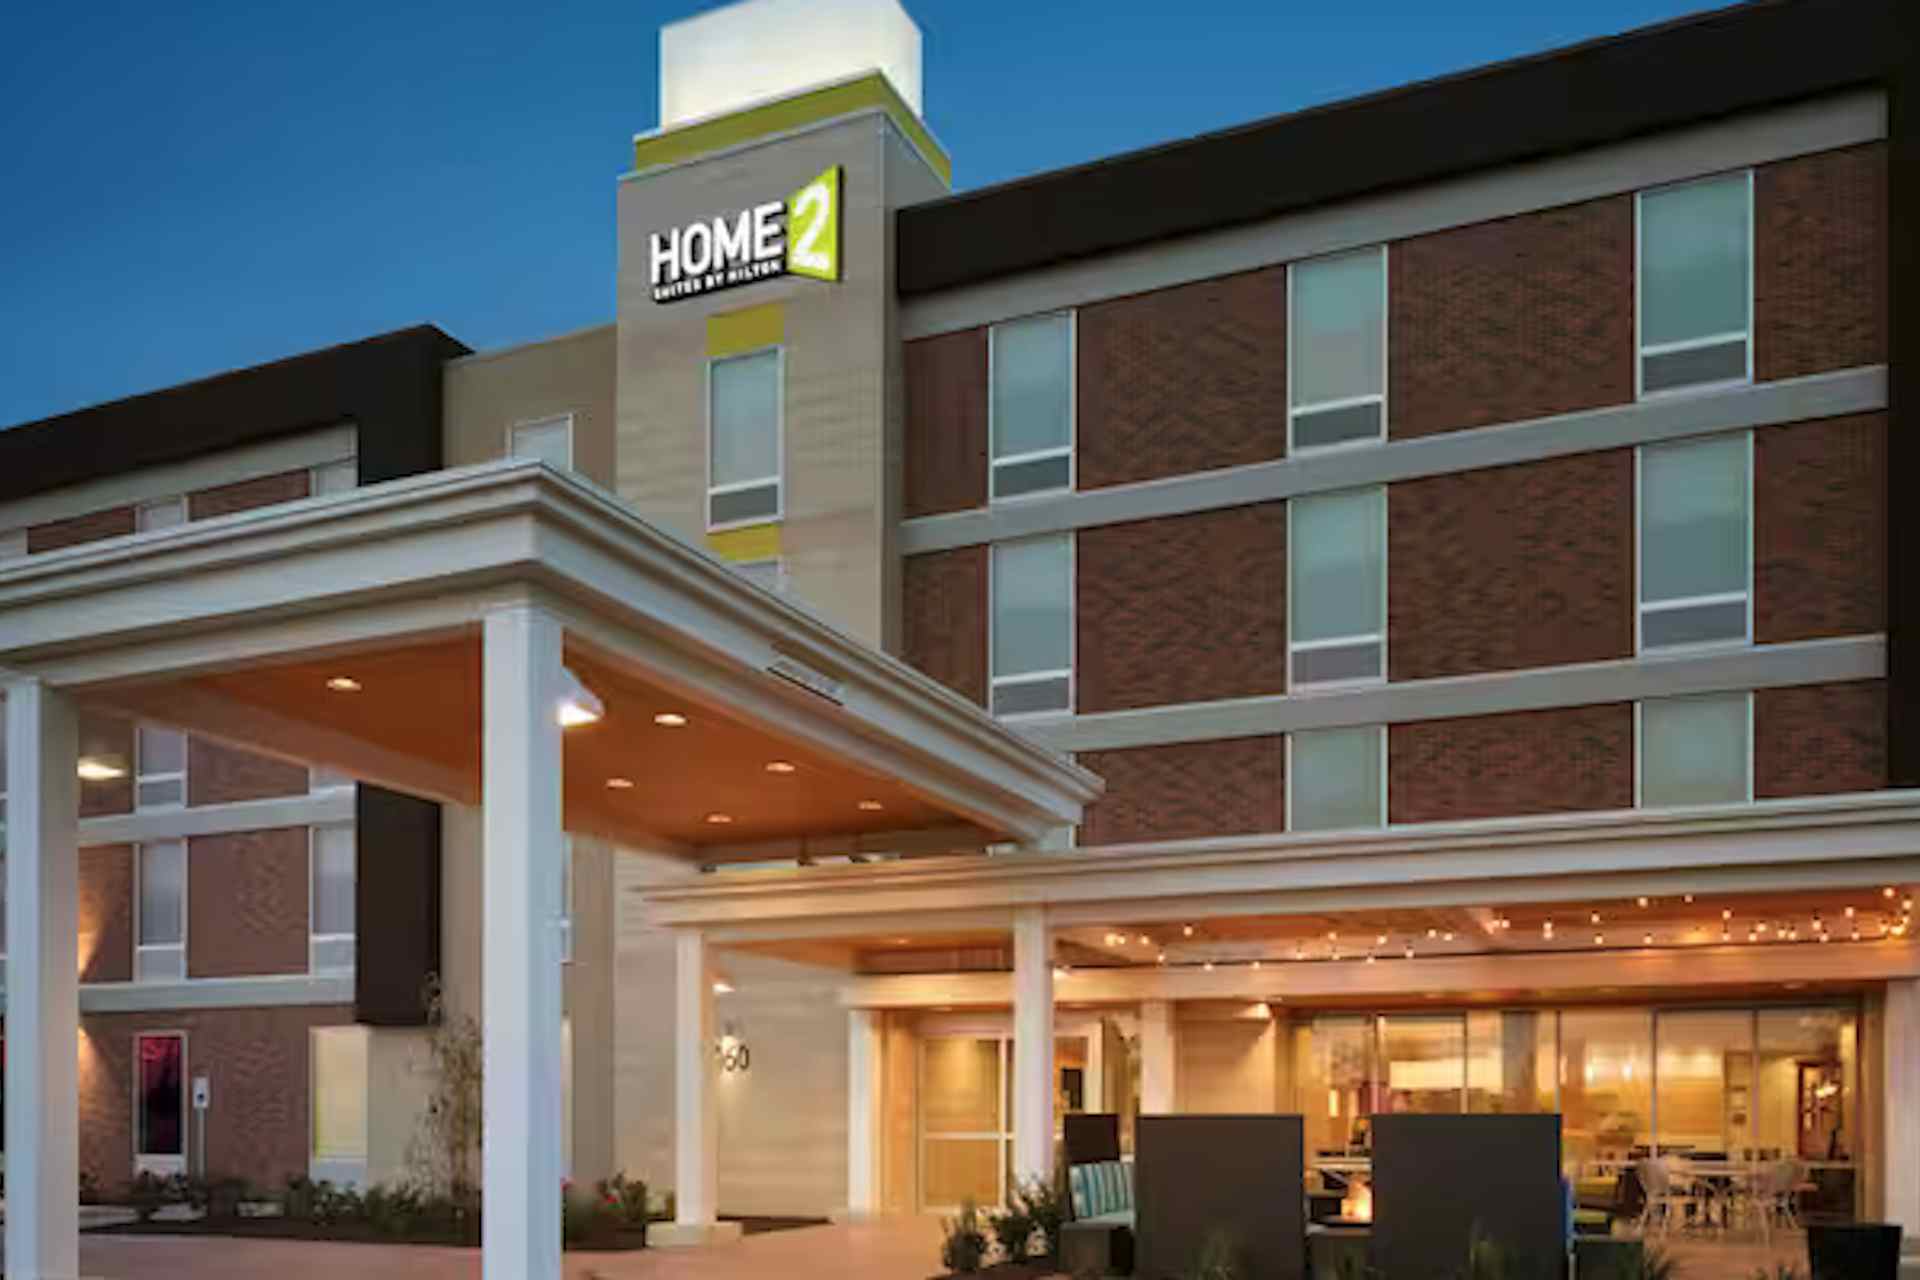 Front entrance view of Home2 Suites by Hilton in located on the edge of downtown Idaho Falls.